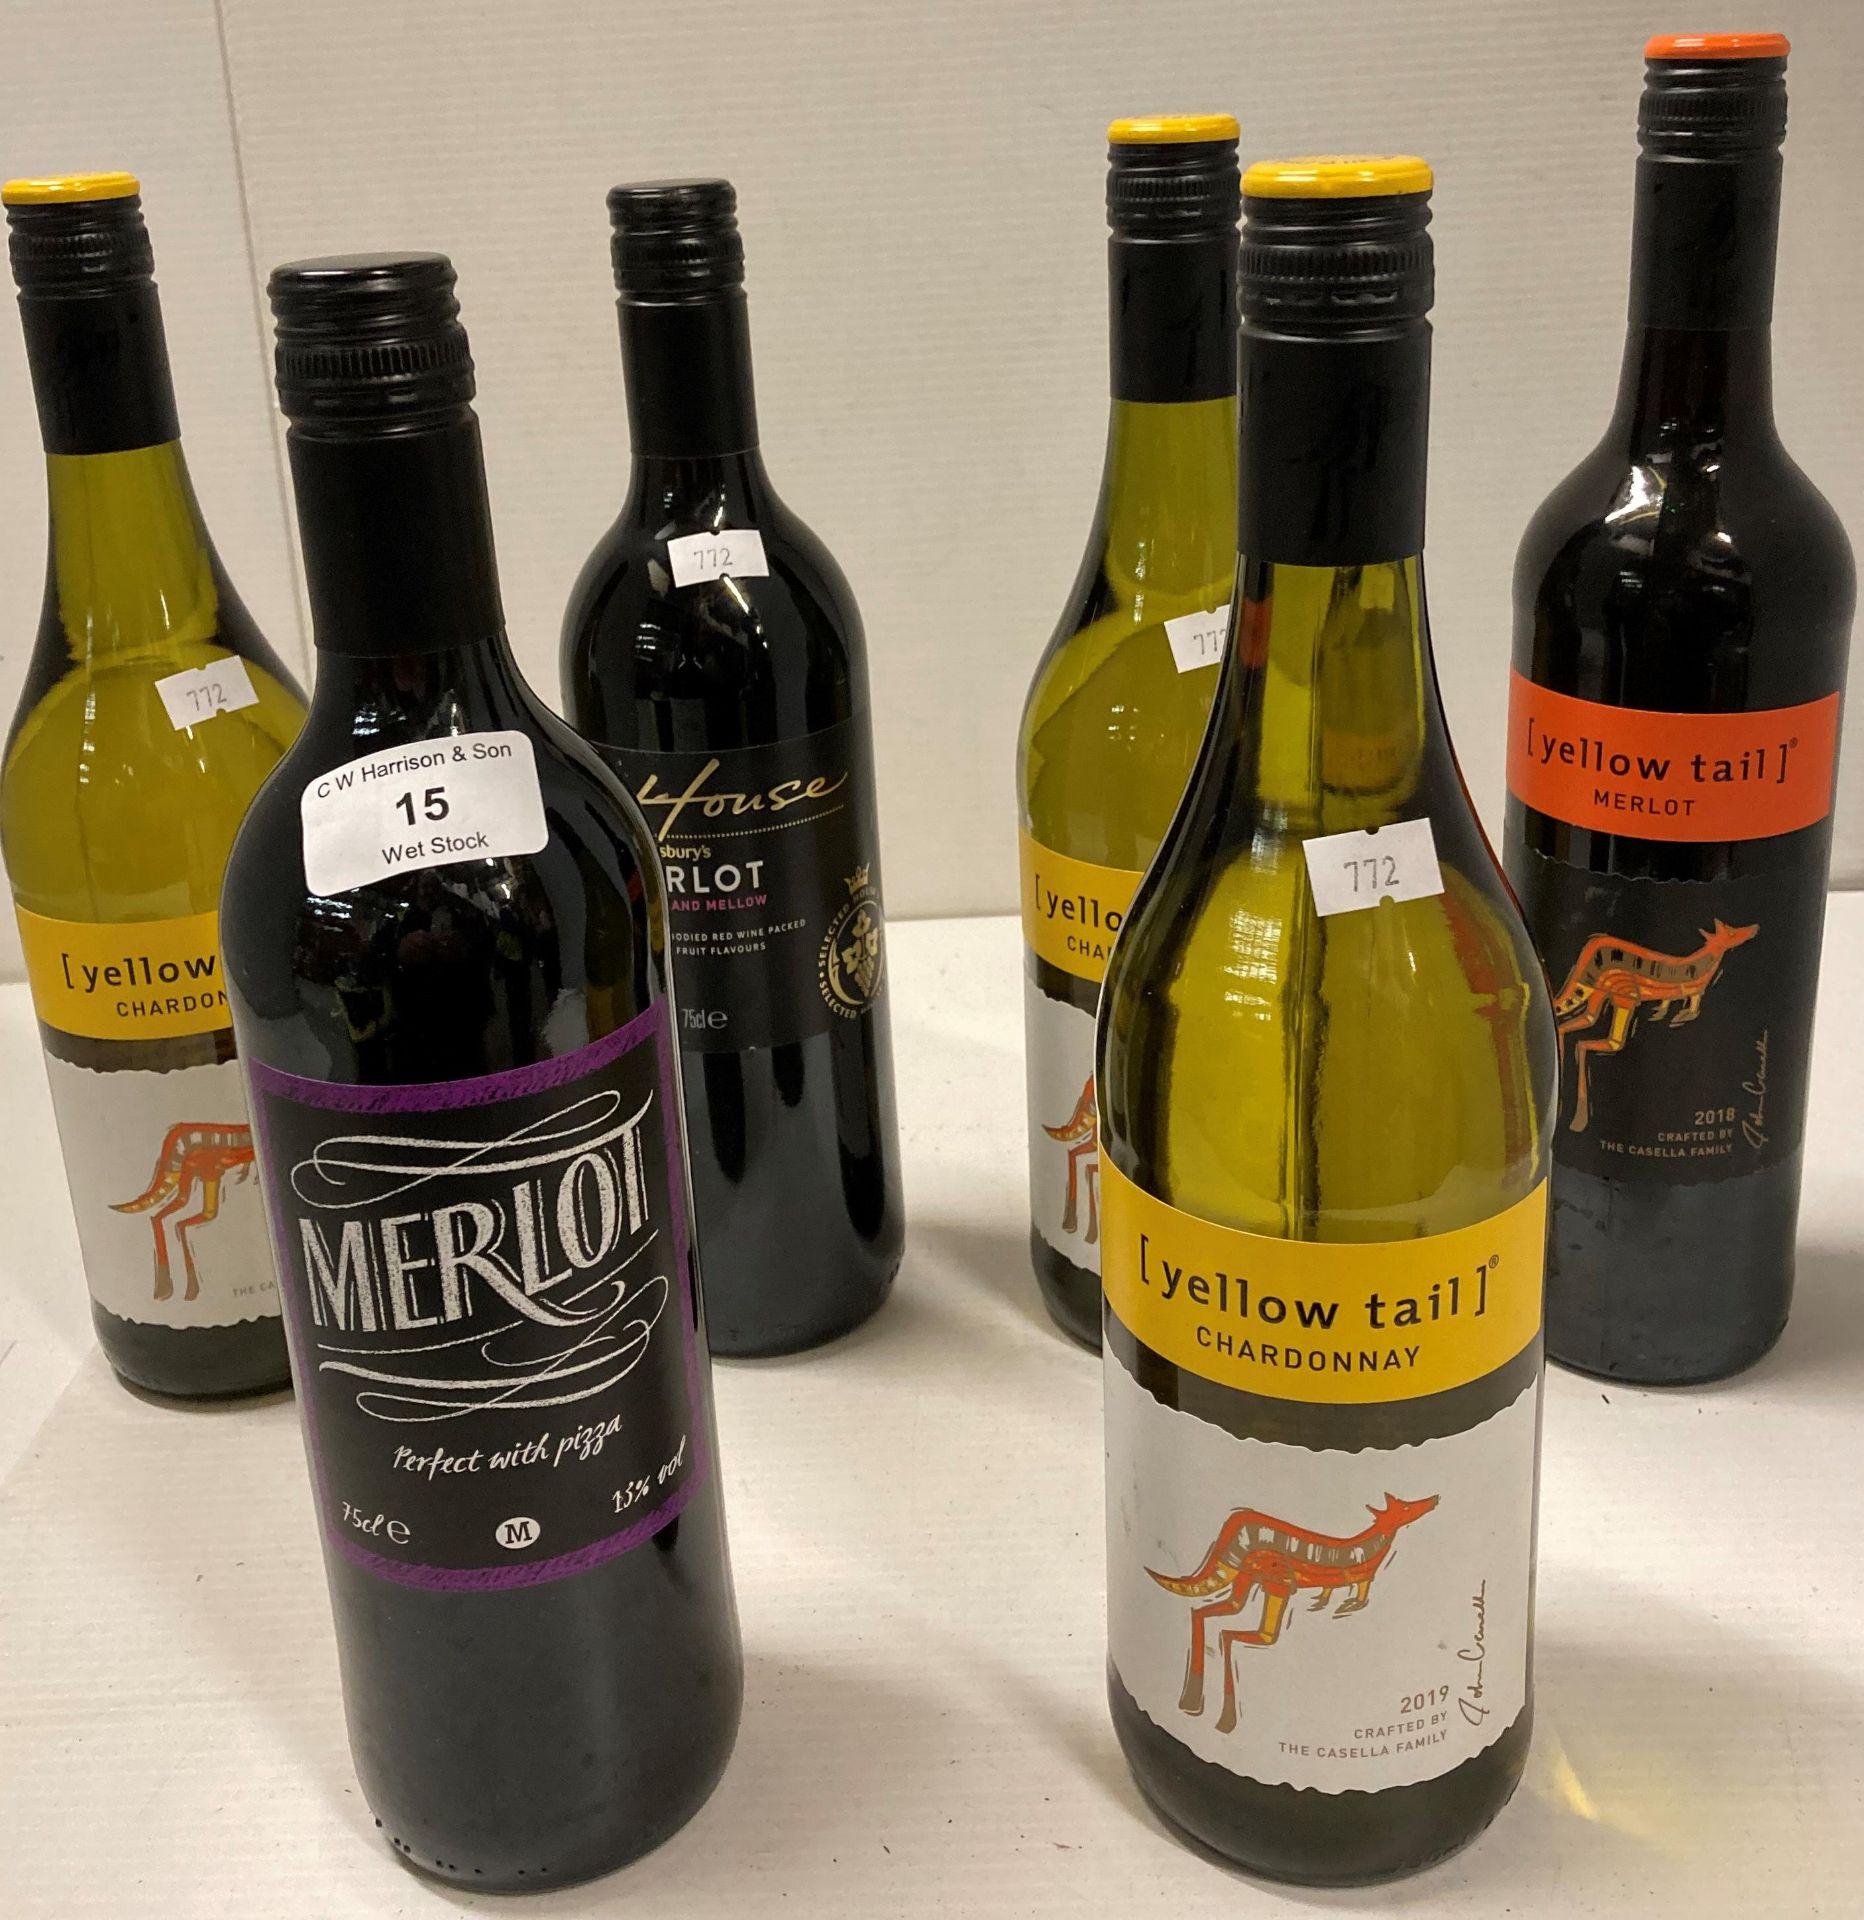 6 x assorted bottles of white and red wine - 3 x Yellow Tail Chardonnay, Yellow Tail Merlot,